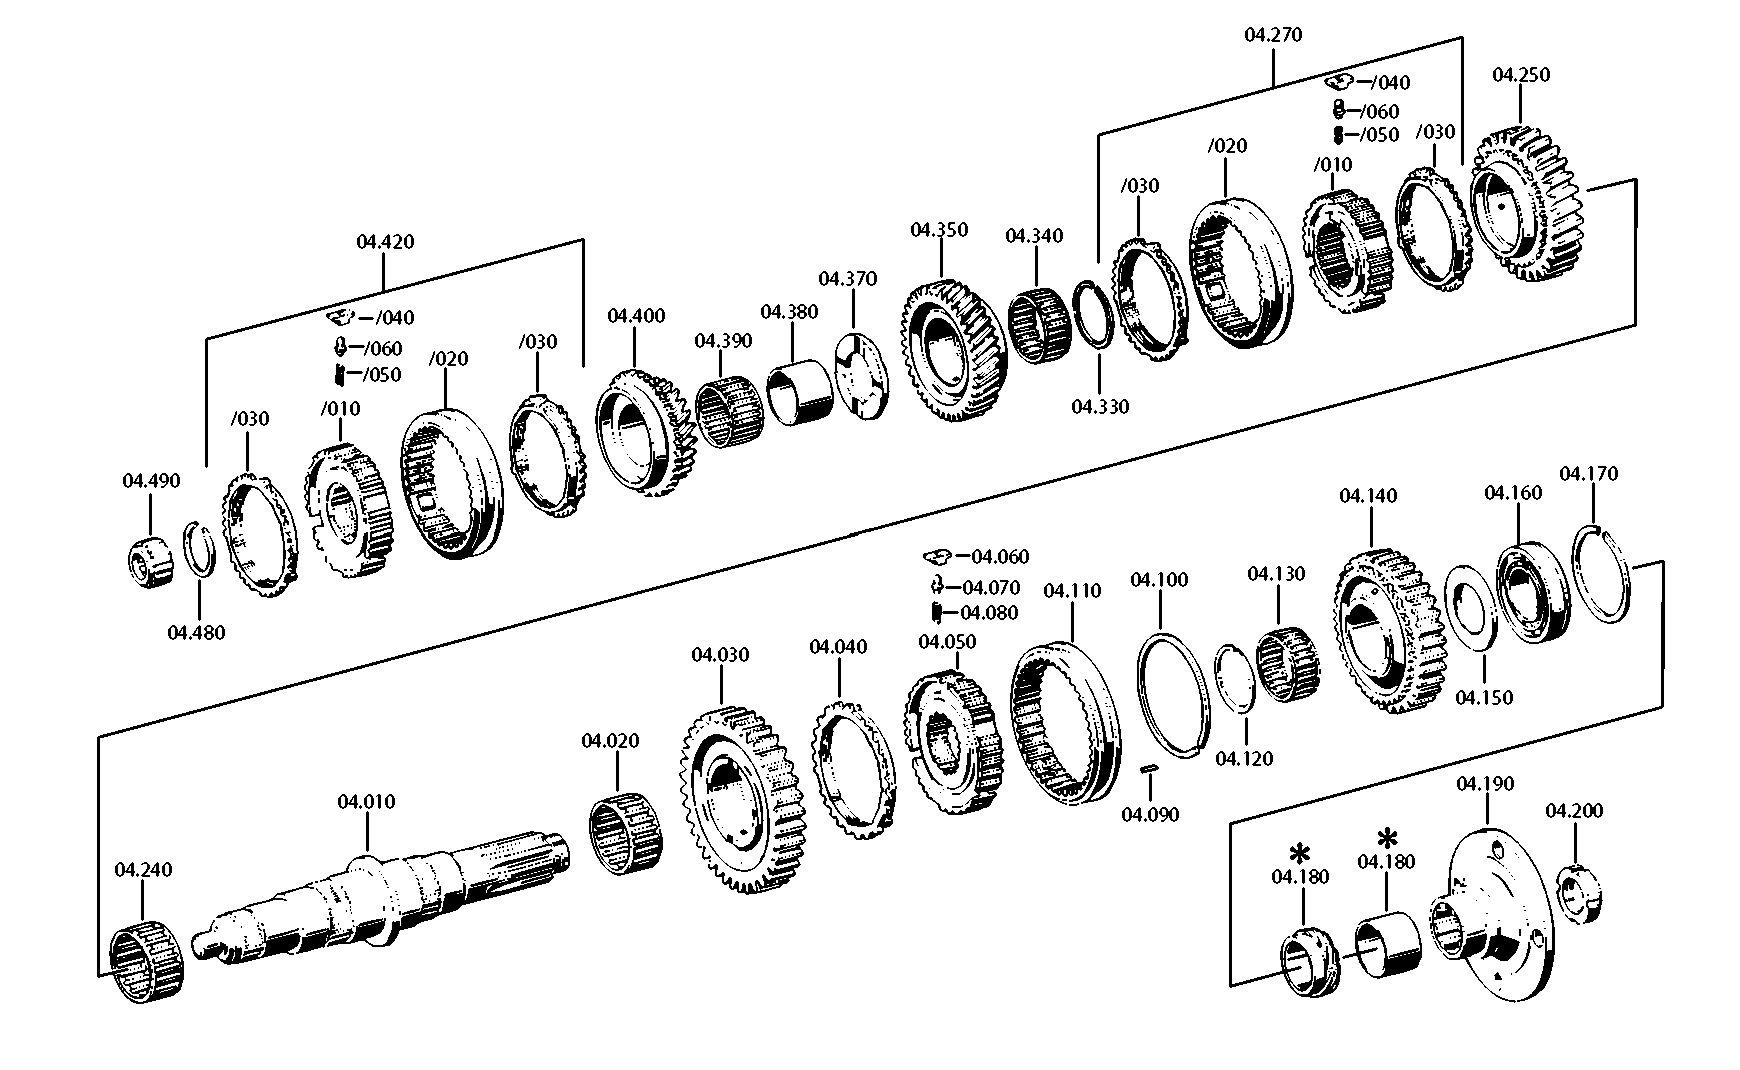 drawing for SKF 170743 - NEEDLE CAGE (figure 1)